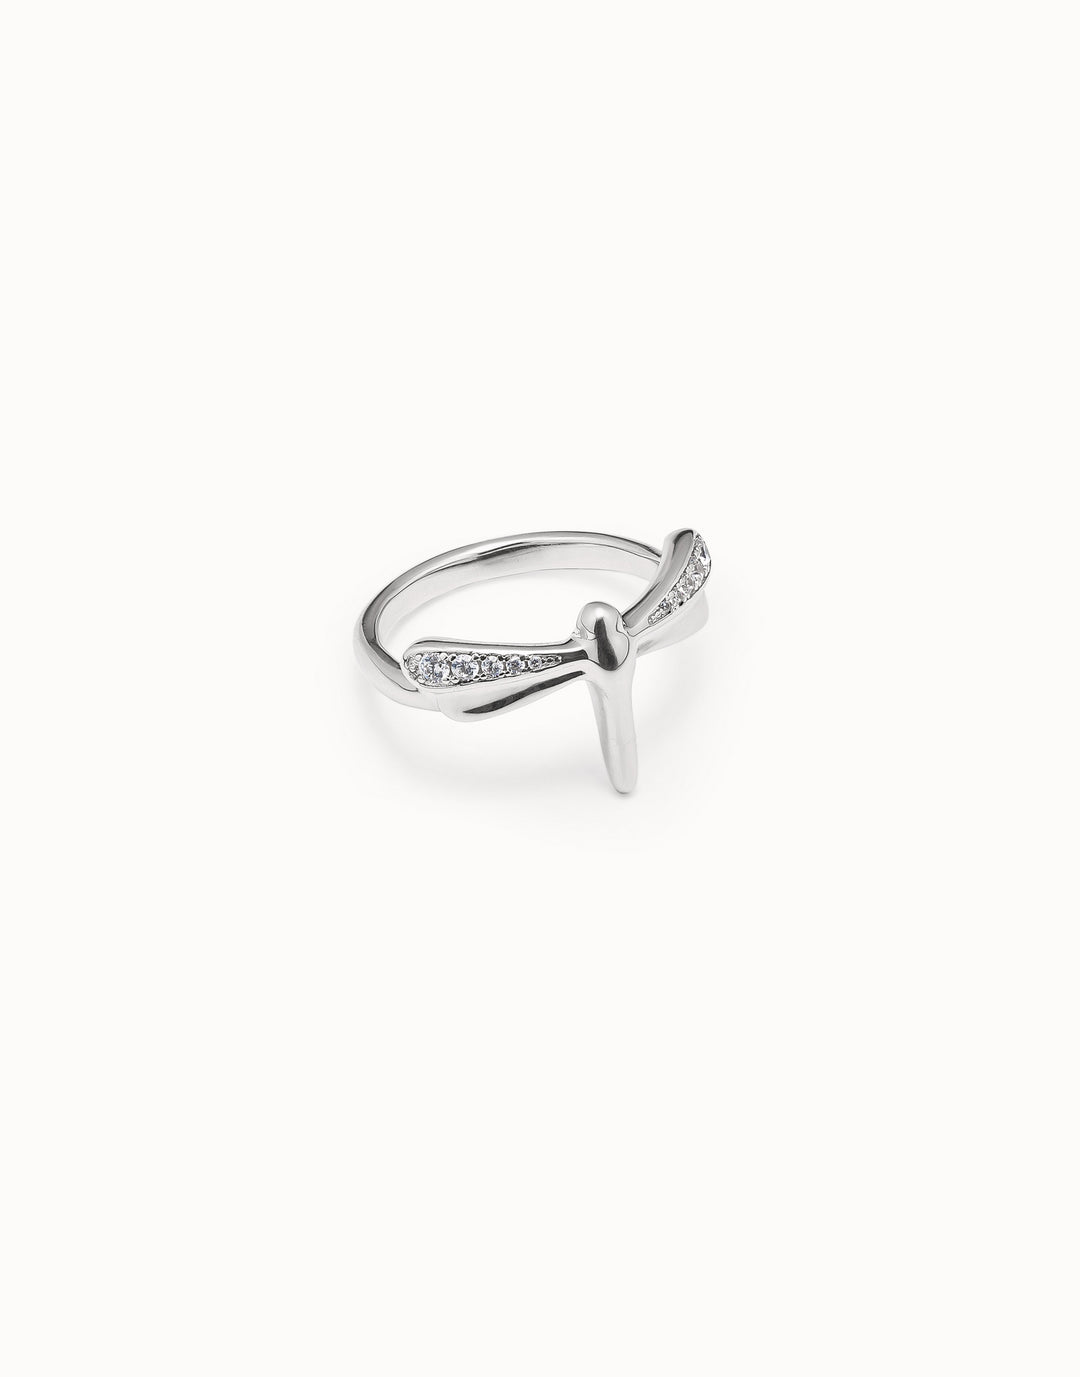 FORTUNE TOPAZ RING - SILVER